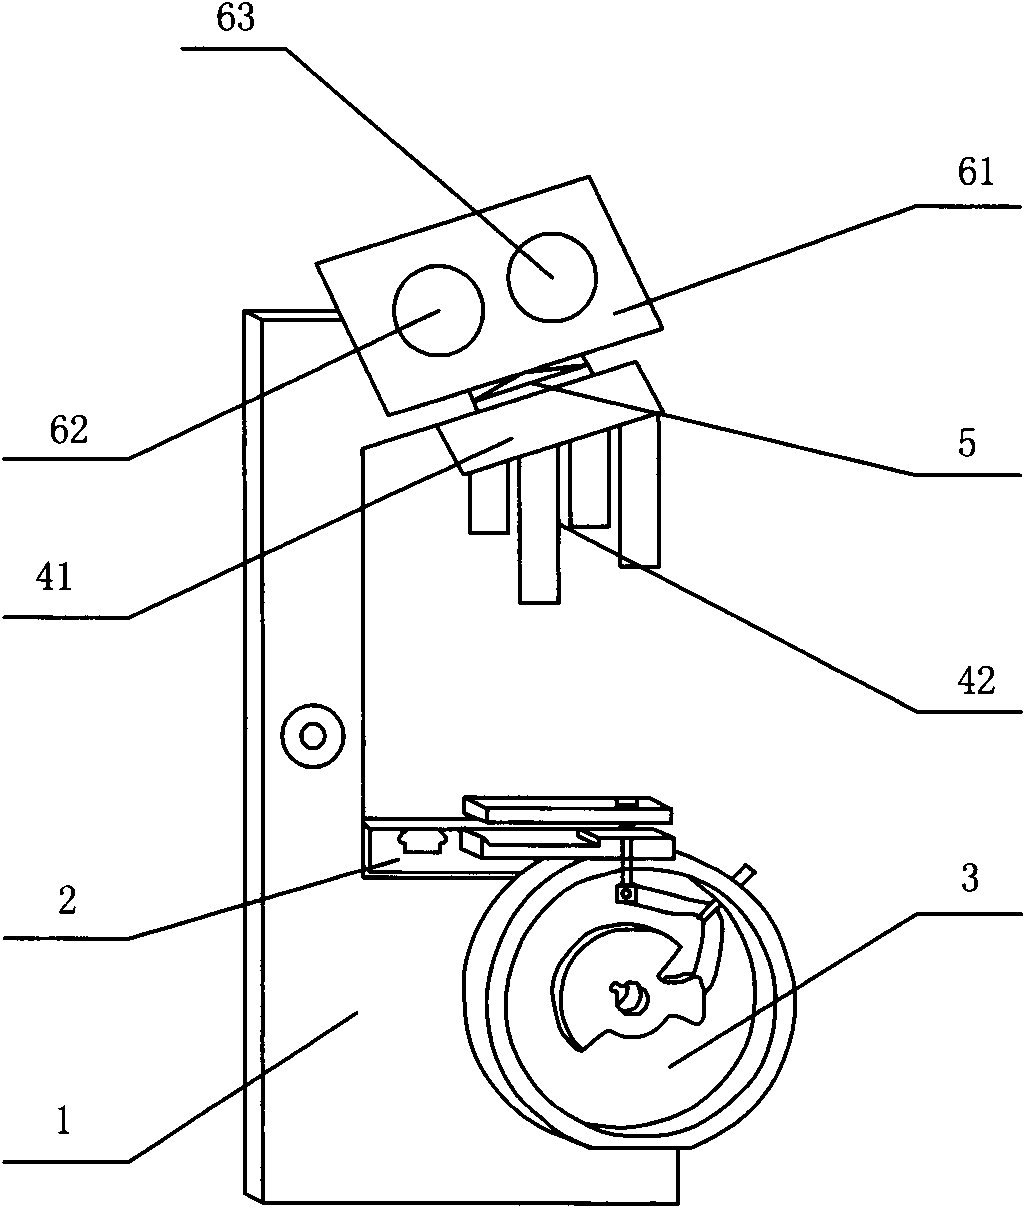 Biological digital microscope with double ccd (charge coupled device) light sensitive elements and photographic image processing method thereof